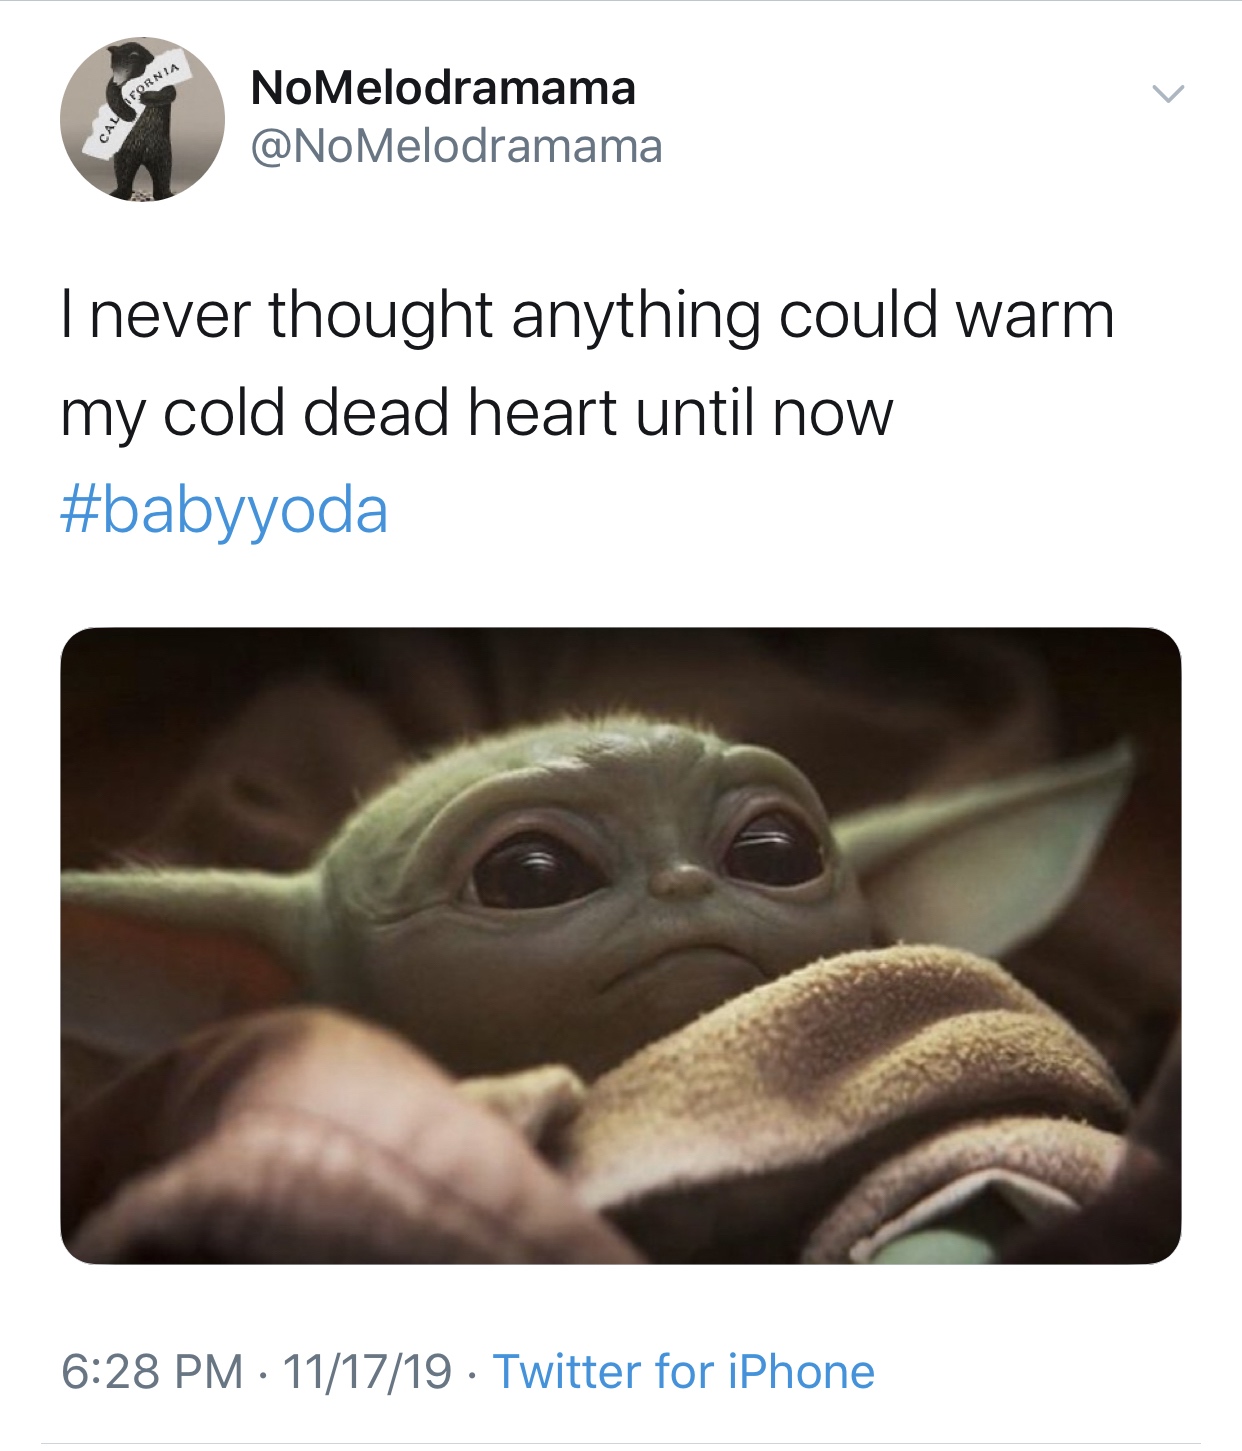 baby yoda meme - Fornia Cal NoMelodramama I never thought anything could warm my cold dead heart until now 111719. Twitter for iPhone